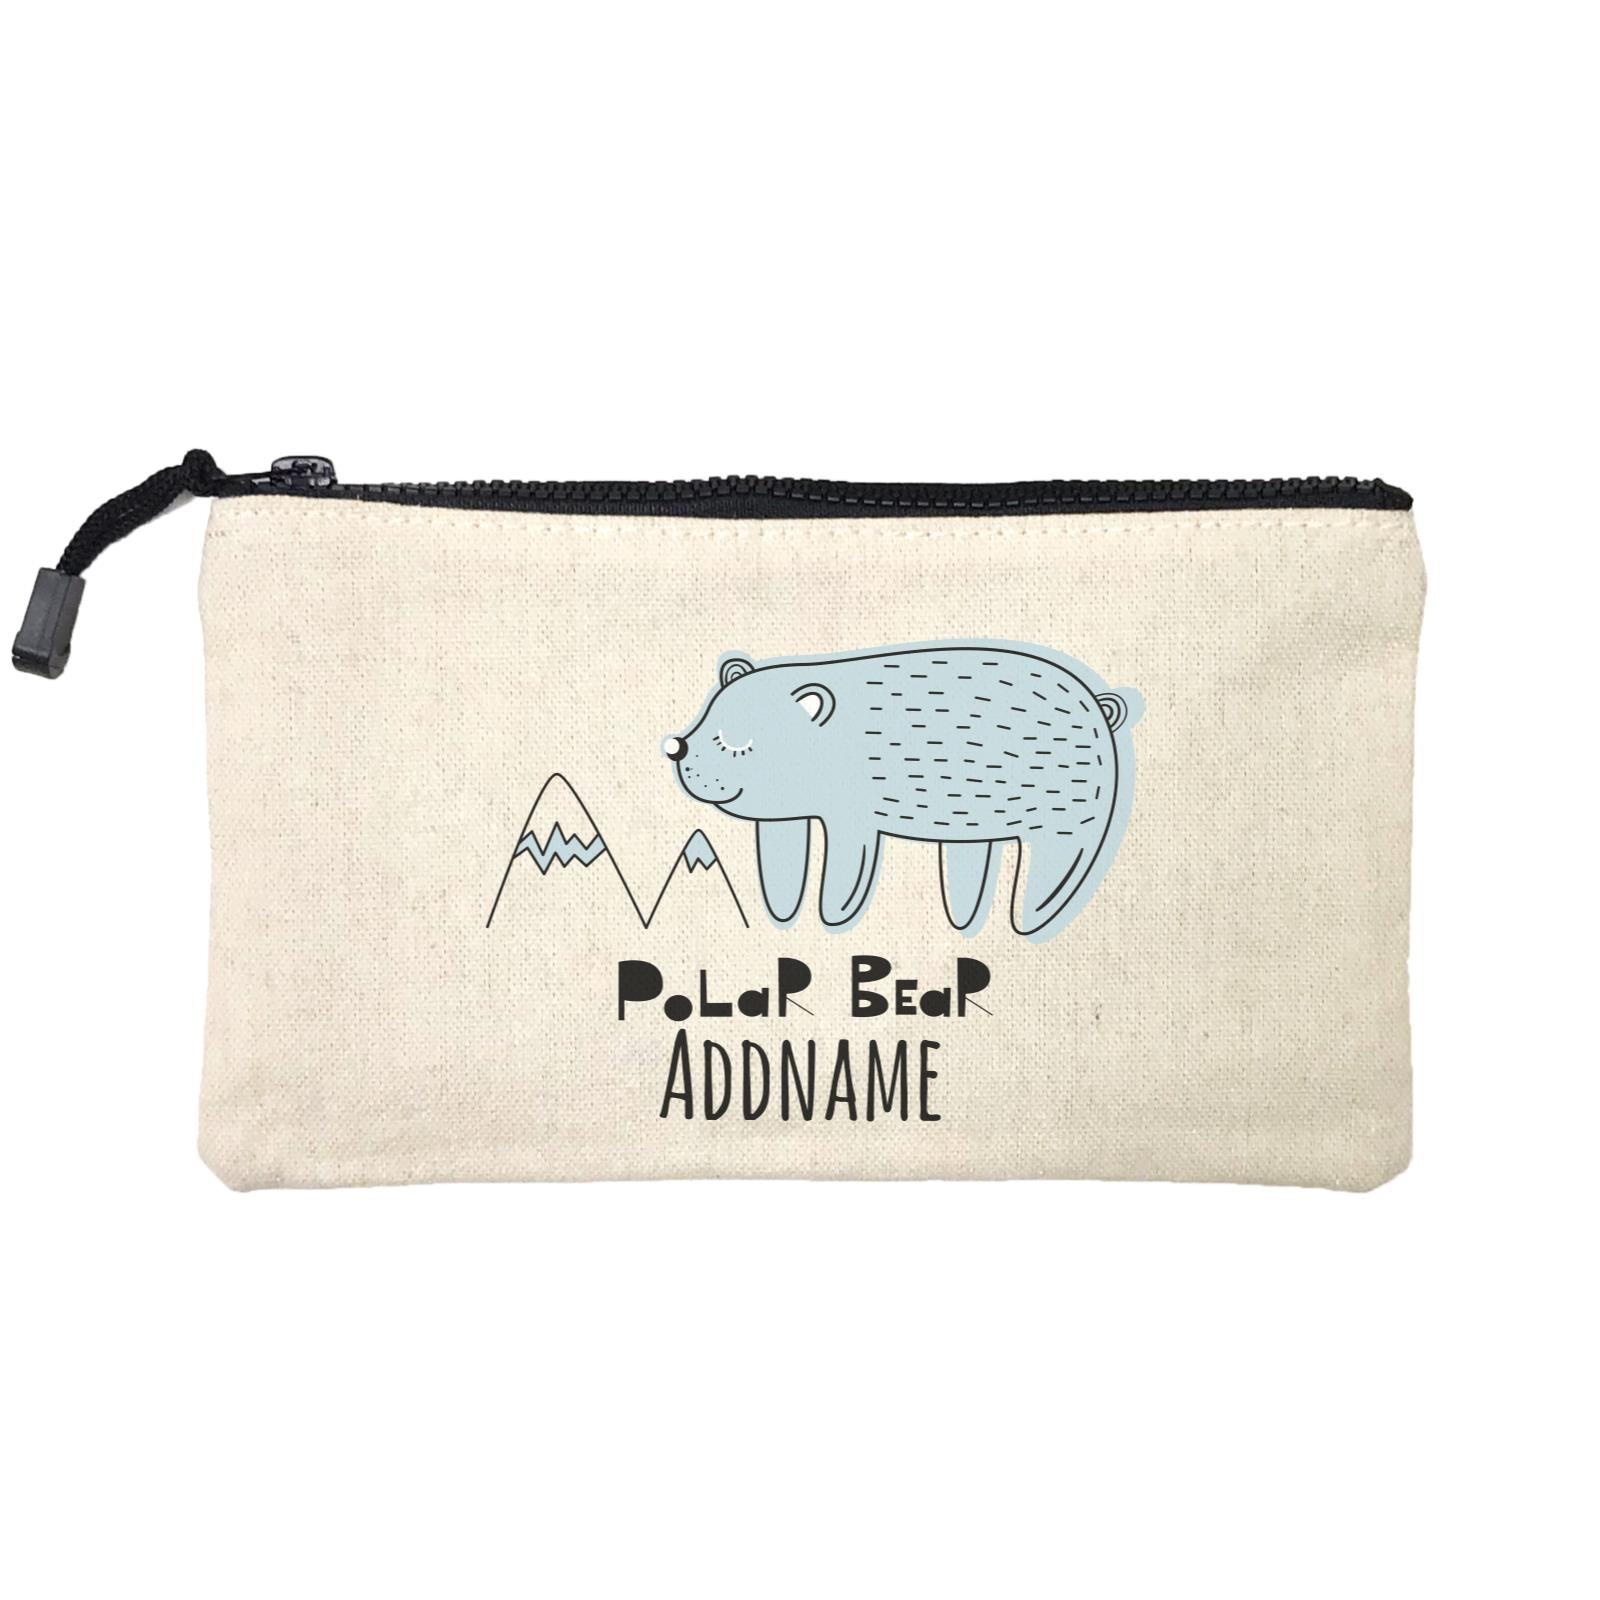 Drawn Adorable Animals Polar Bear Addname Mini Accessories Stationery Pouch